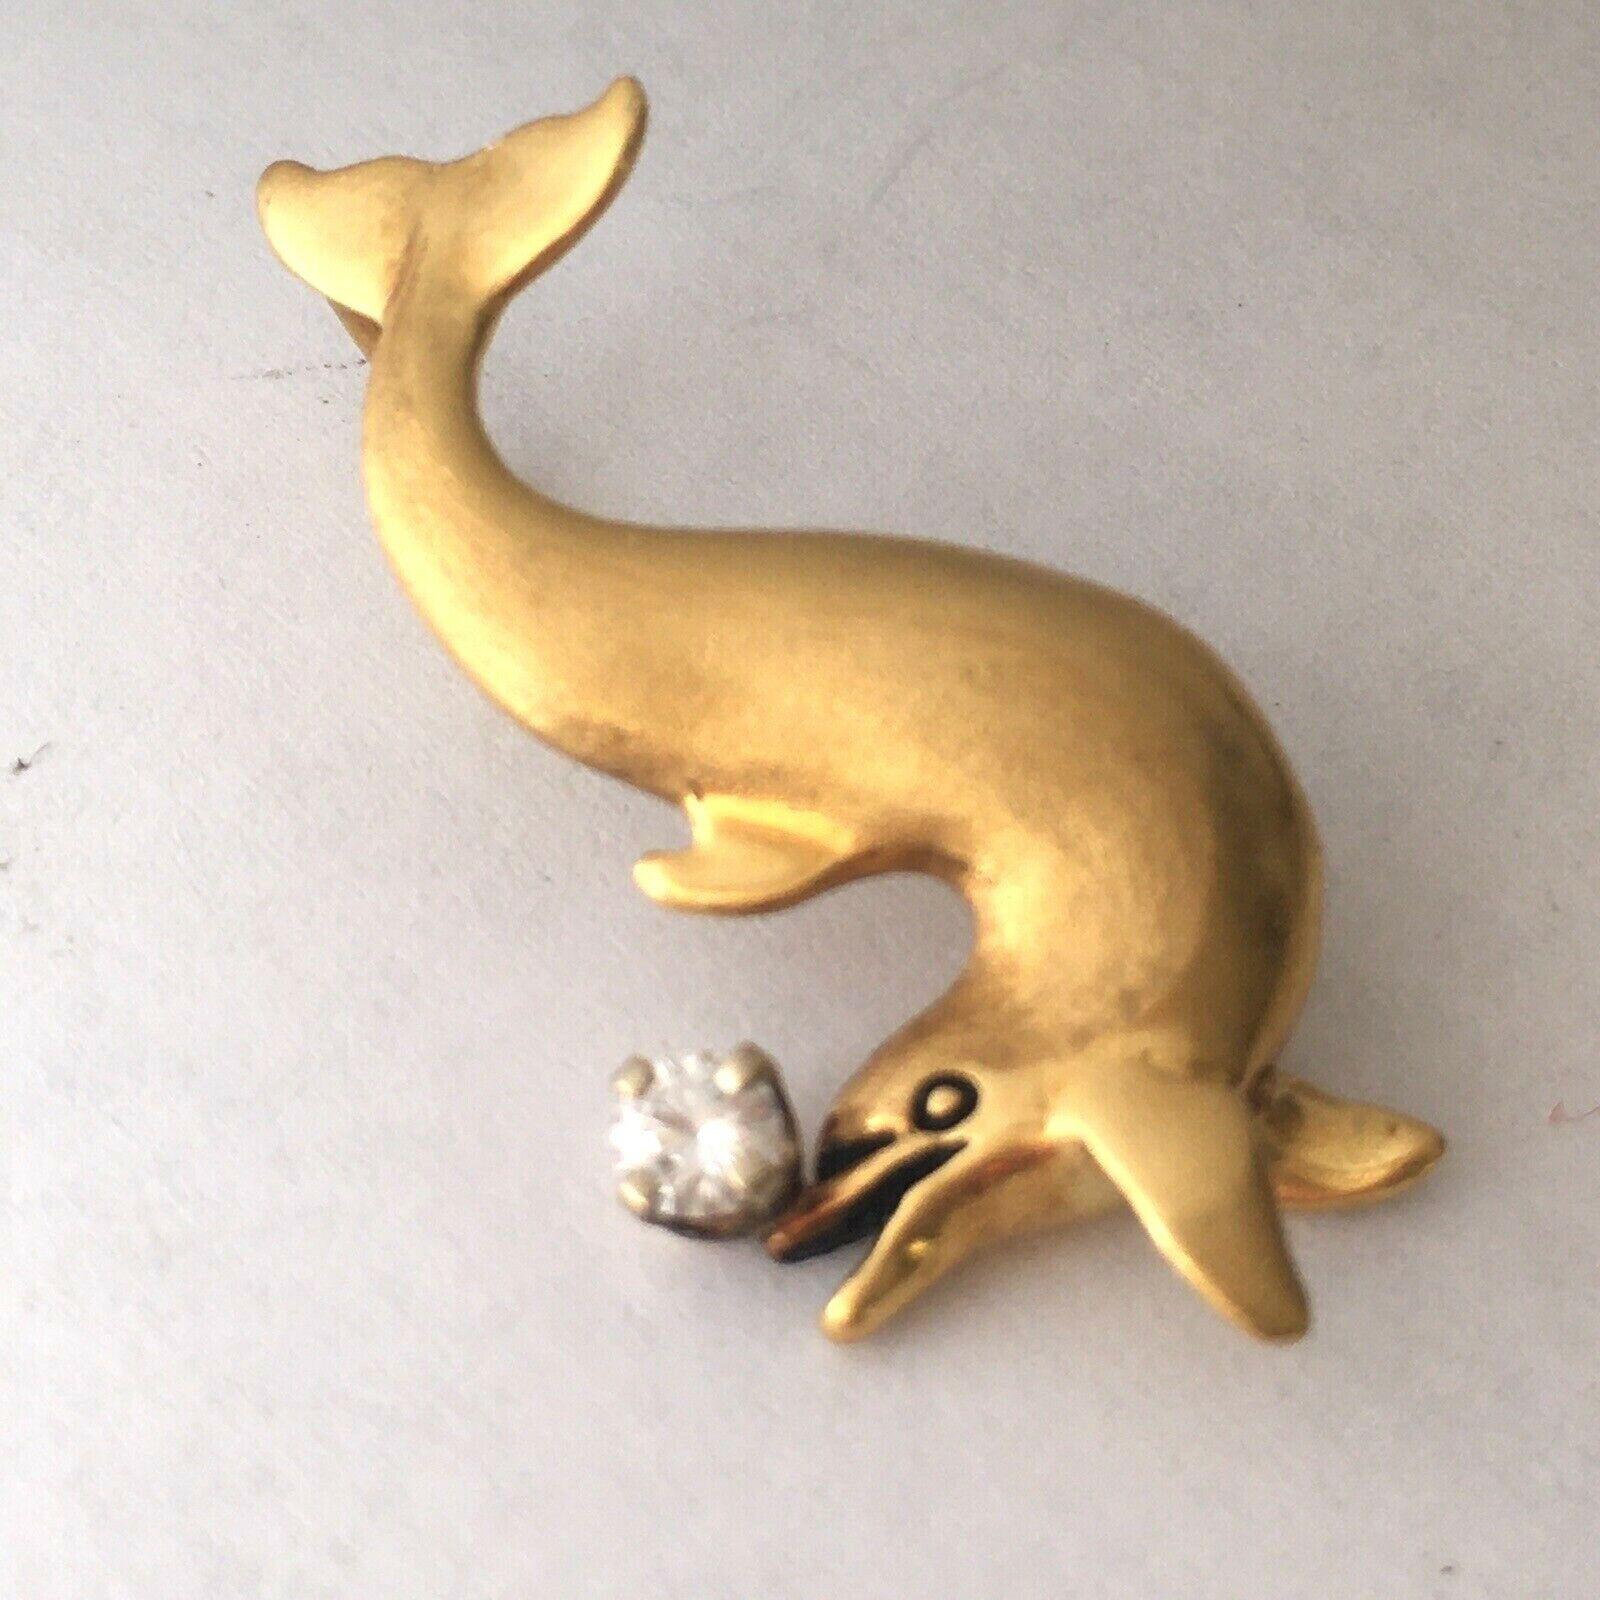 Artisan g & g Appleby 18K Yellow Gold Playful Dolphin 3D Charm Pendant Signed Copyright For Sale